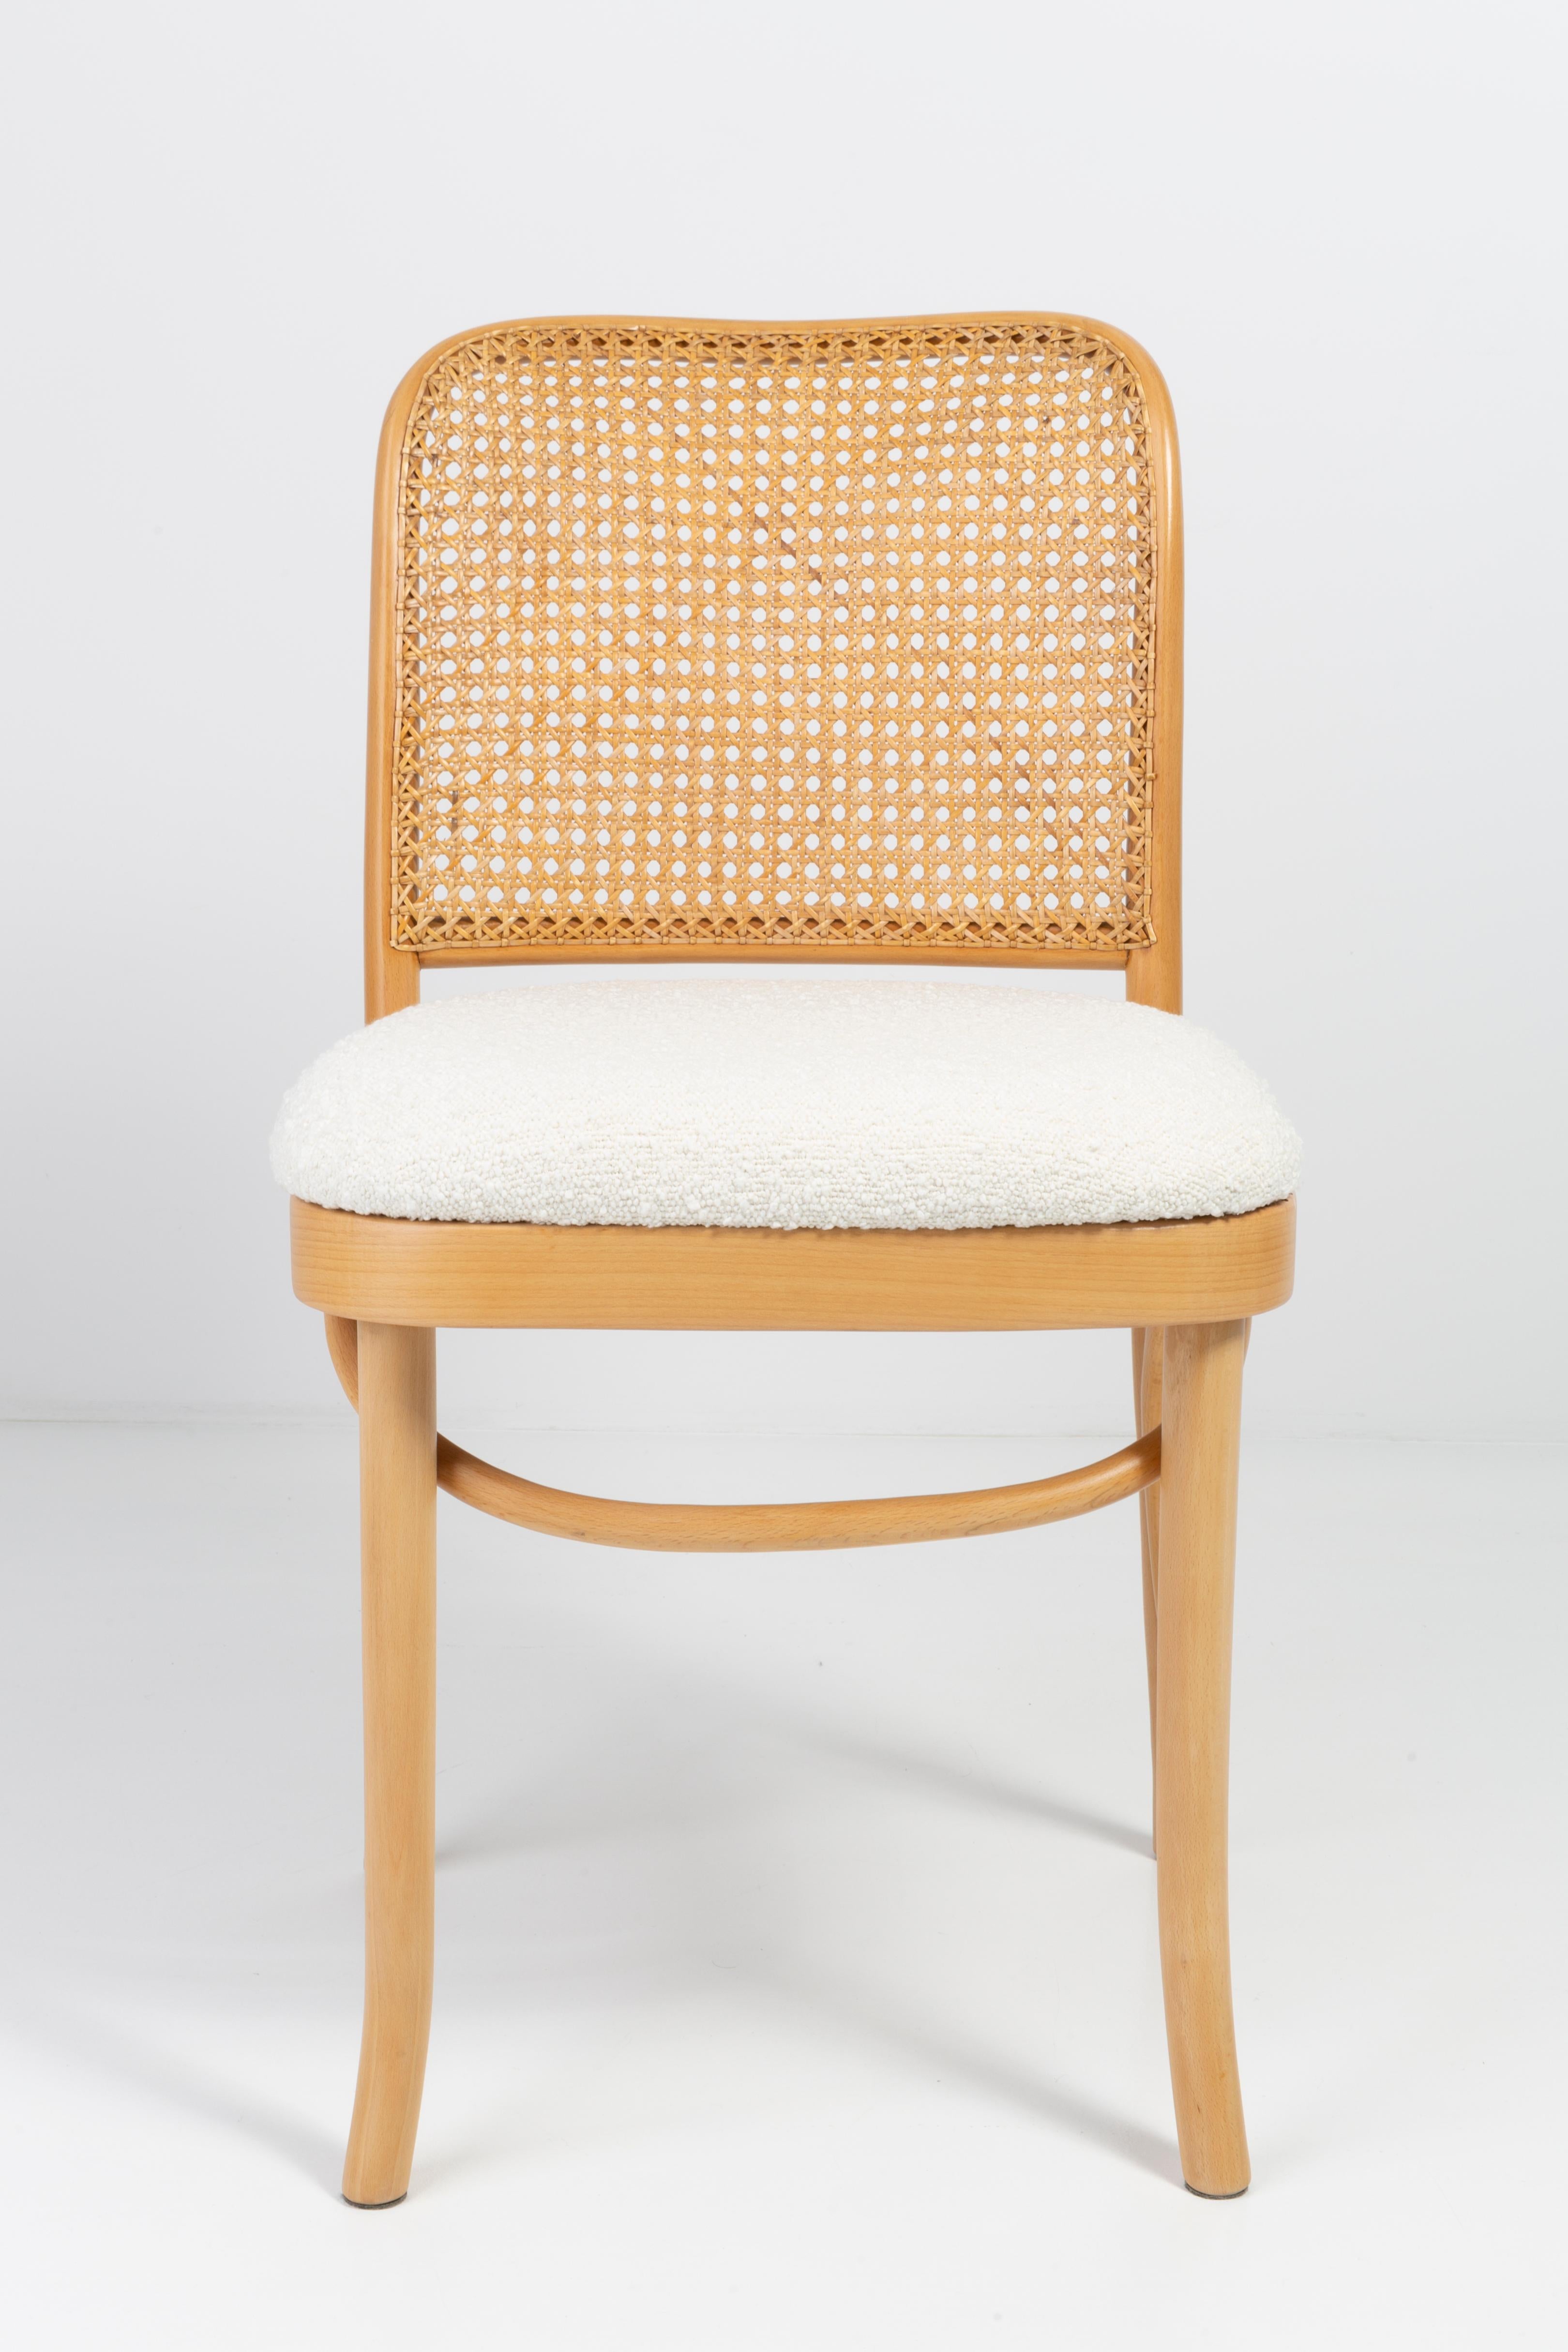 Set of Six White Boucle Thonet Wood Rattan Chairs, 1960s For Sale 10